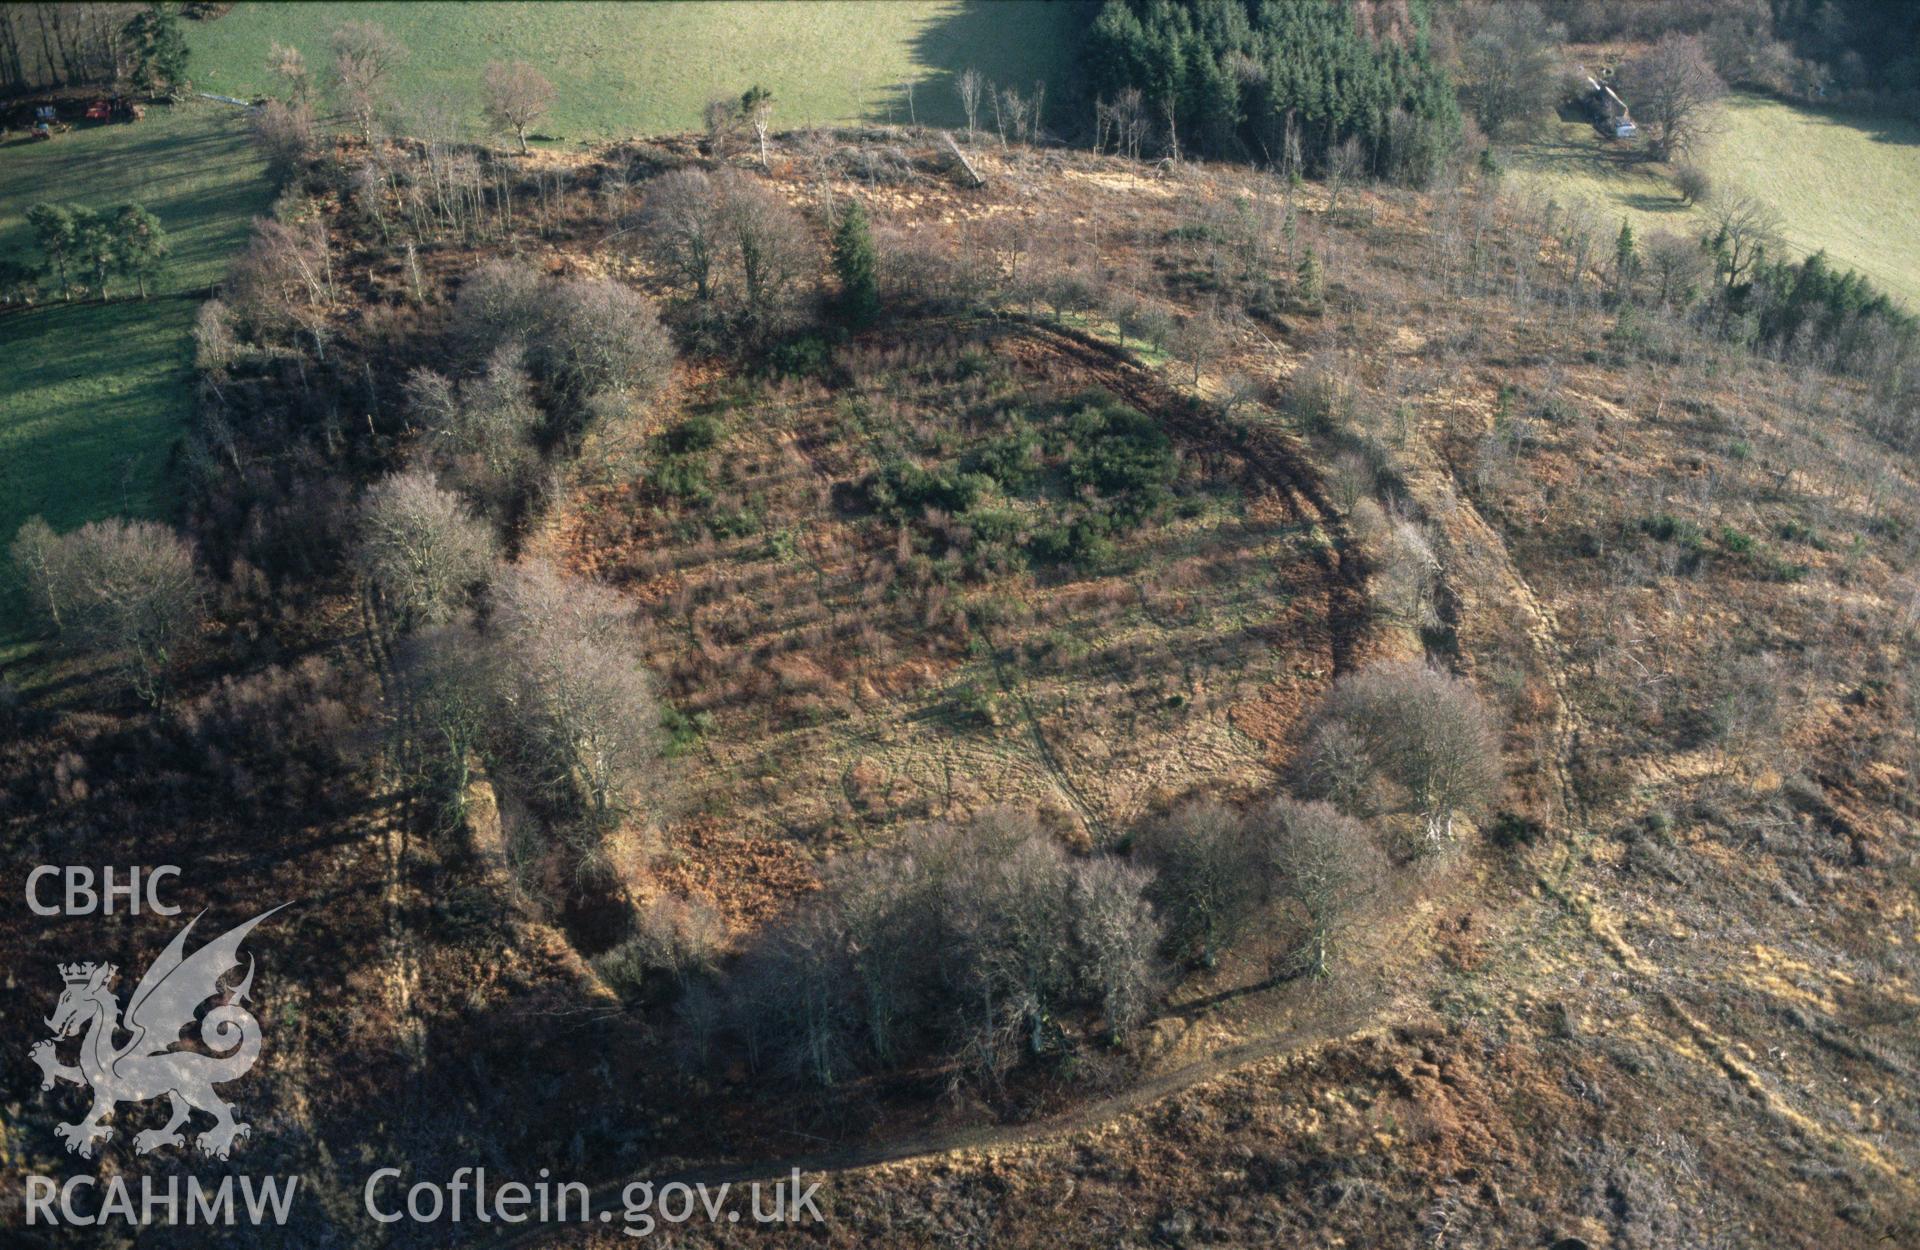 Slide of RCAHMW colour oblique aerial photograph of Castle Ring, Pen Offa, taken by C.R. Musson, 27/12/1996.